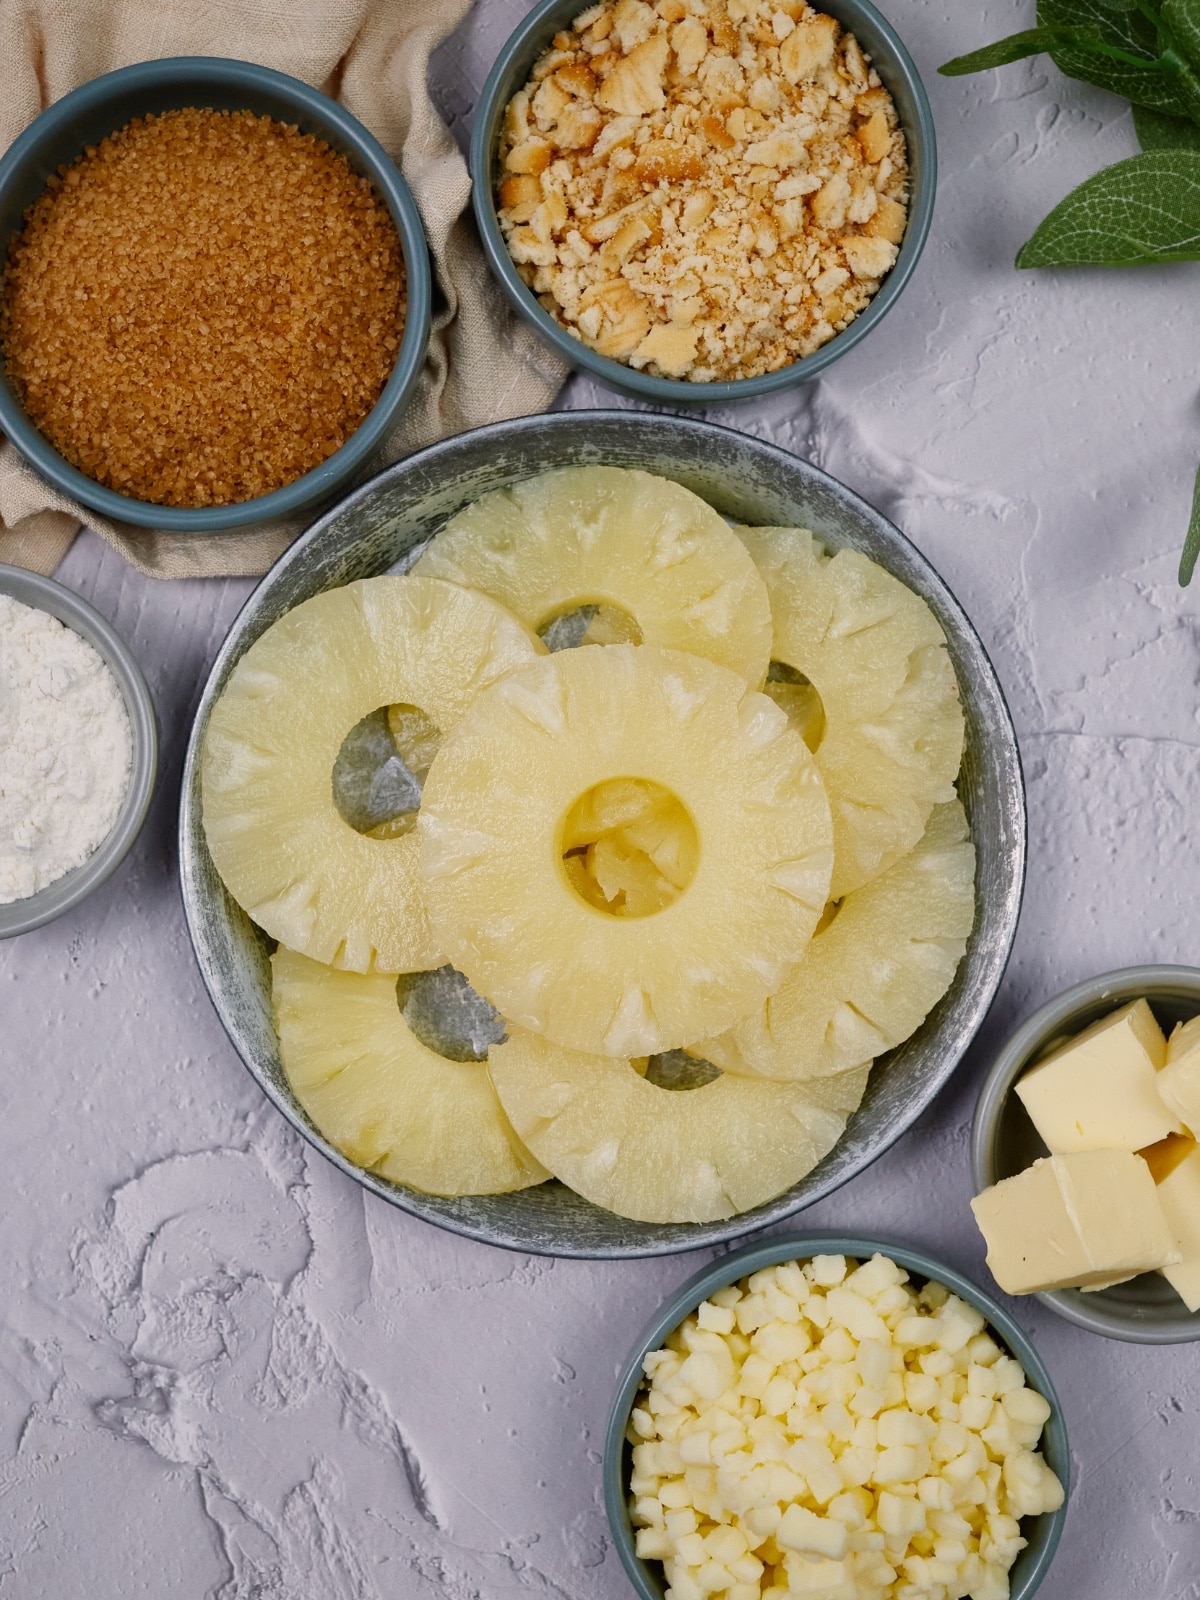 ingredients of pineapple casserole in small blue bowls on a white surface